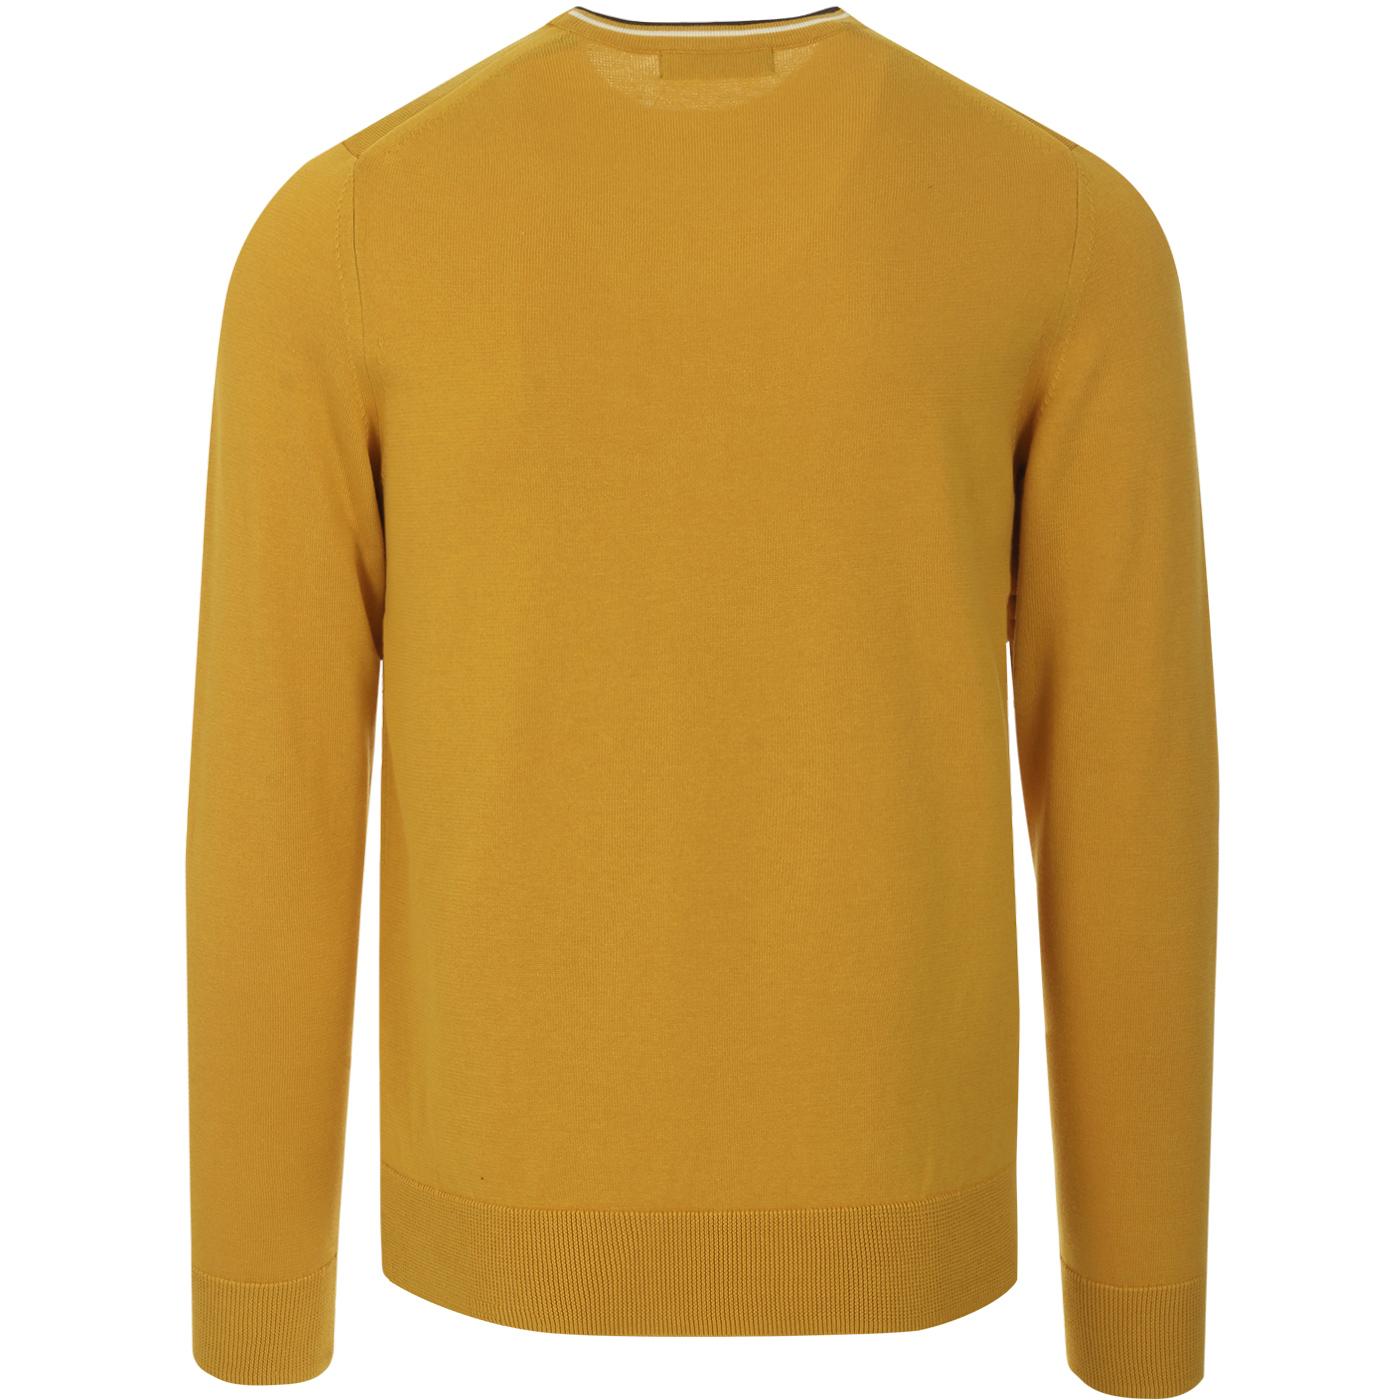 FRED PERRY Men's Mod Knitted Crew Jumper in Gold